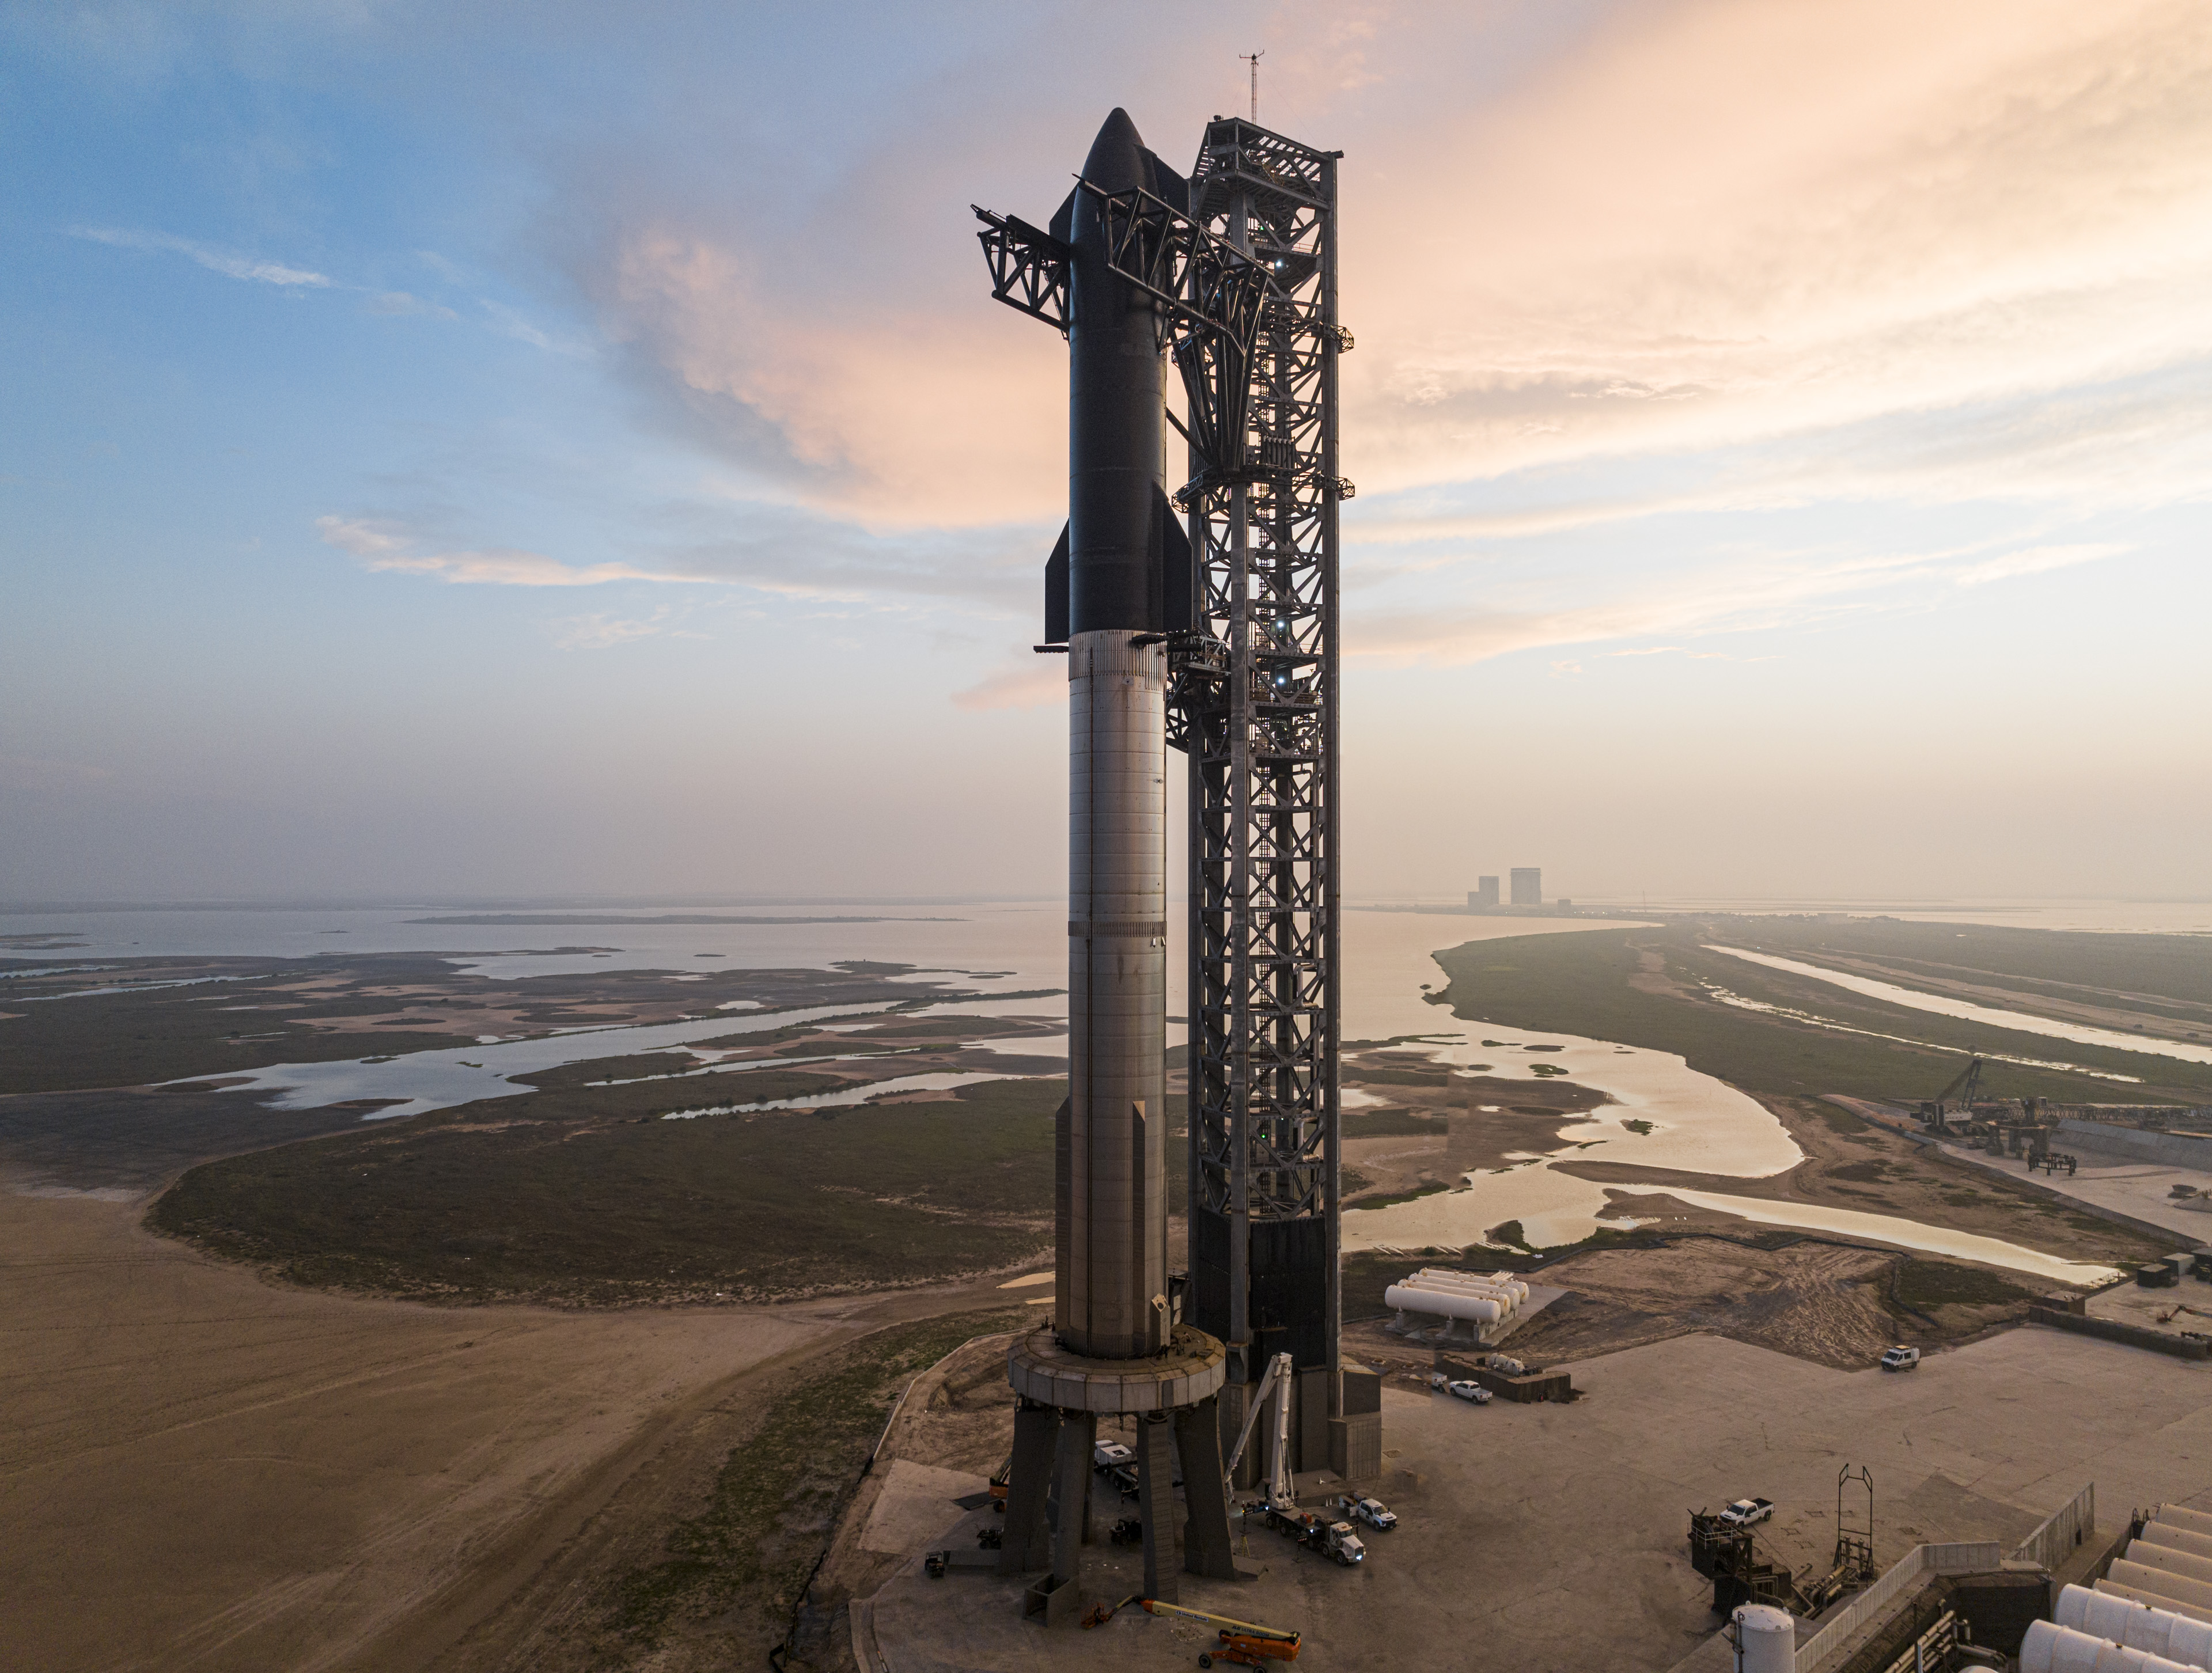 A large rocket stands vertically on a launch pad with support structures nearby. The surrounding area includes water and flat, open land extending into the distance under a twilight sky.